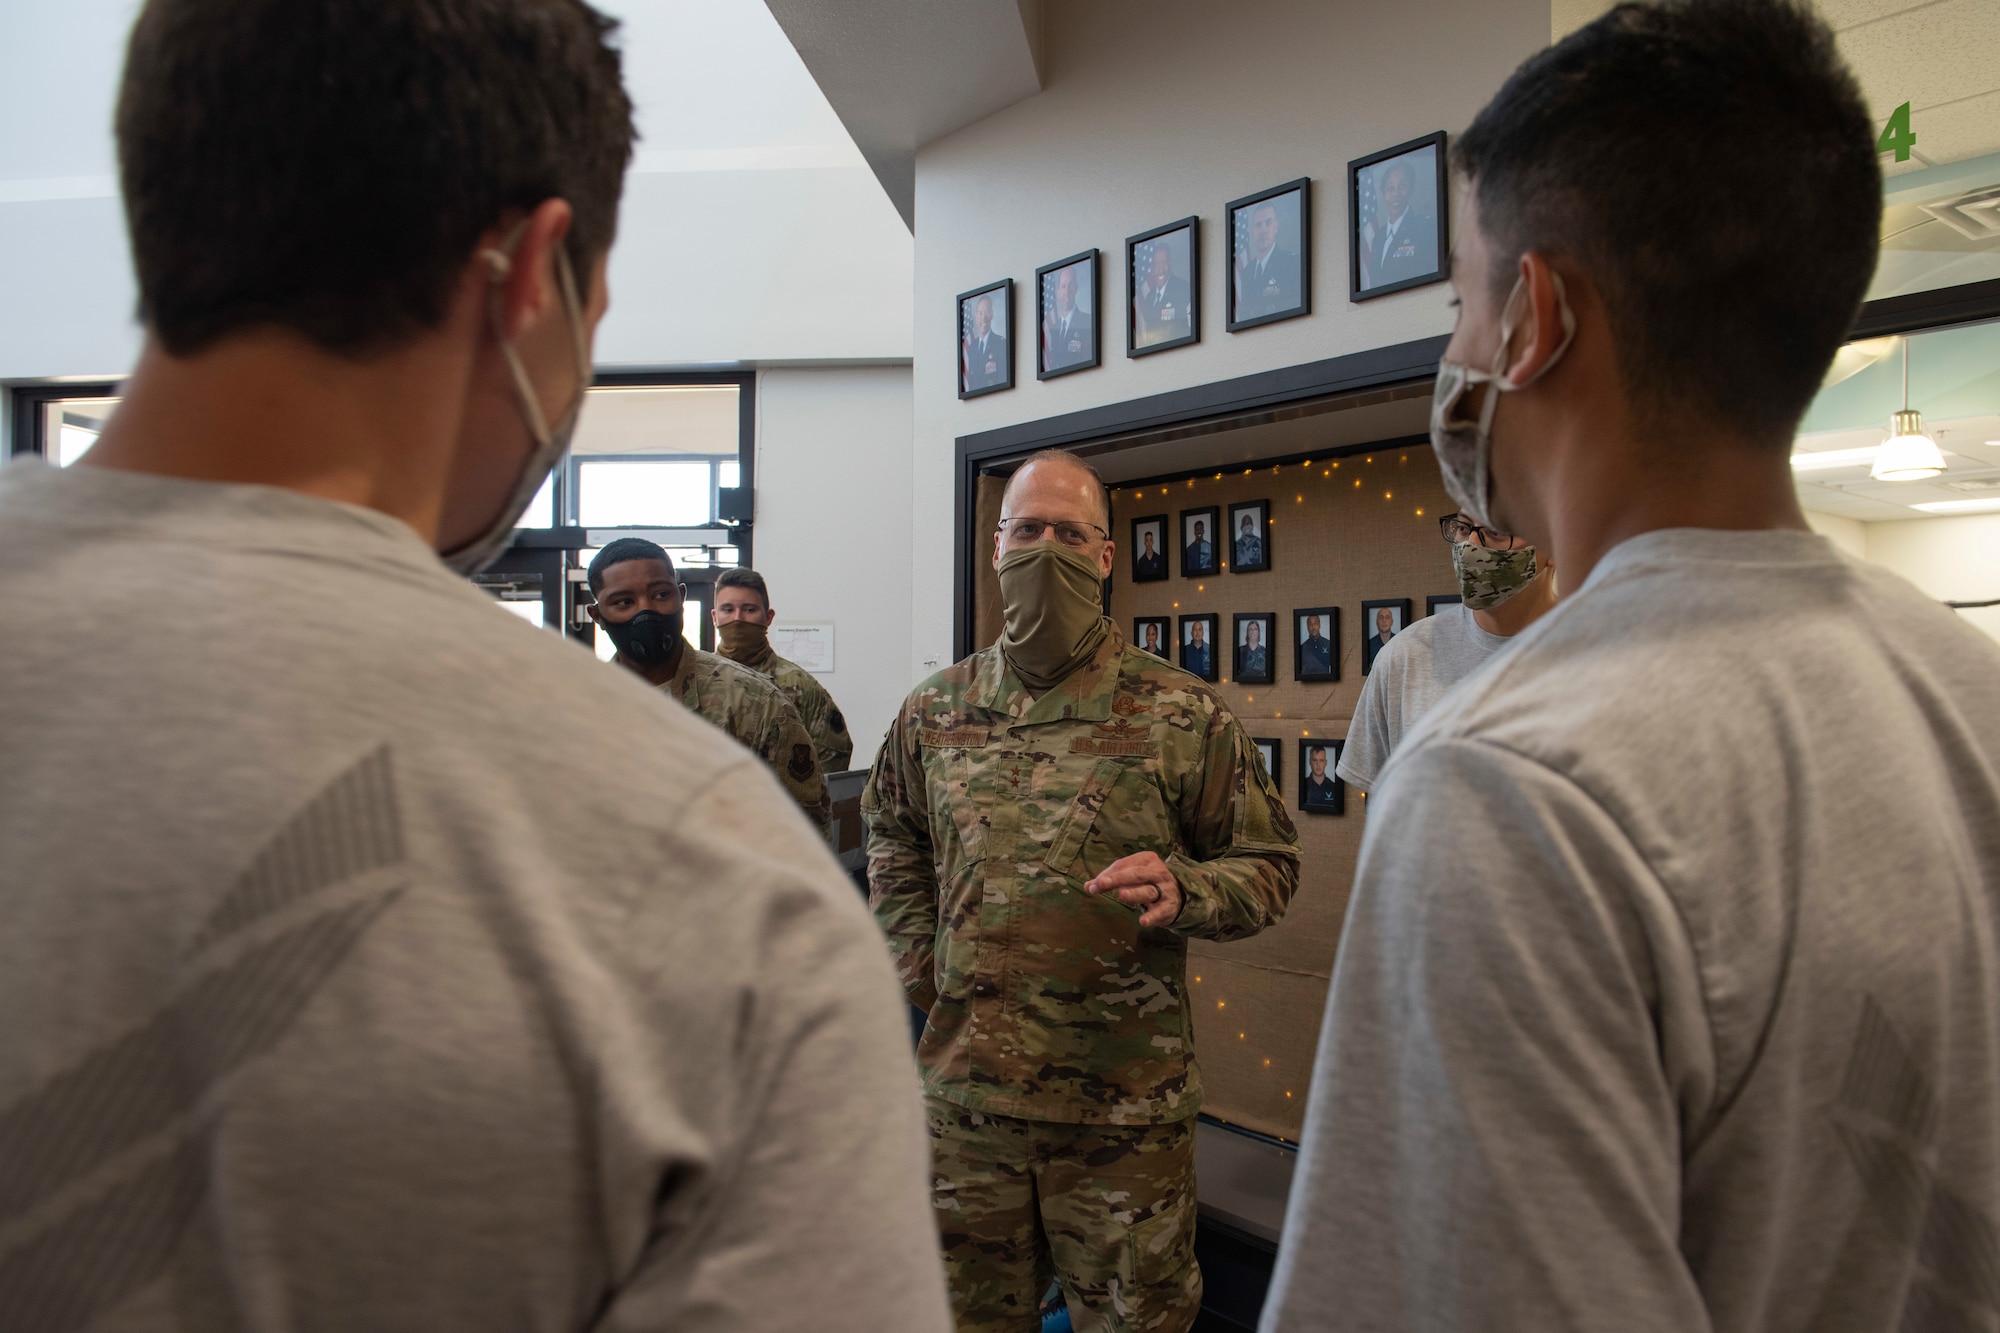 Maj. Gen. Mark Weatherington, 8th Air Force and Joint-Global Strike Operations Center commander, middle, talks with Airmen assigned to the 7th Force Support Squadron about their careers and well-being at Dyess Air Force Base, Texas, Aug. 11, 2020.